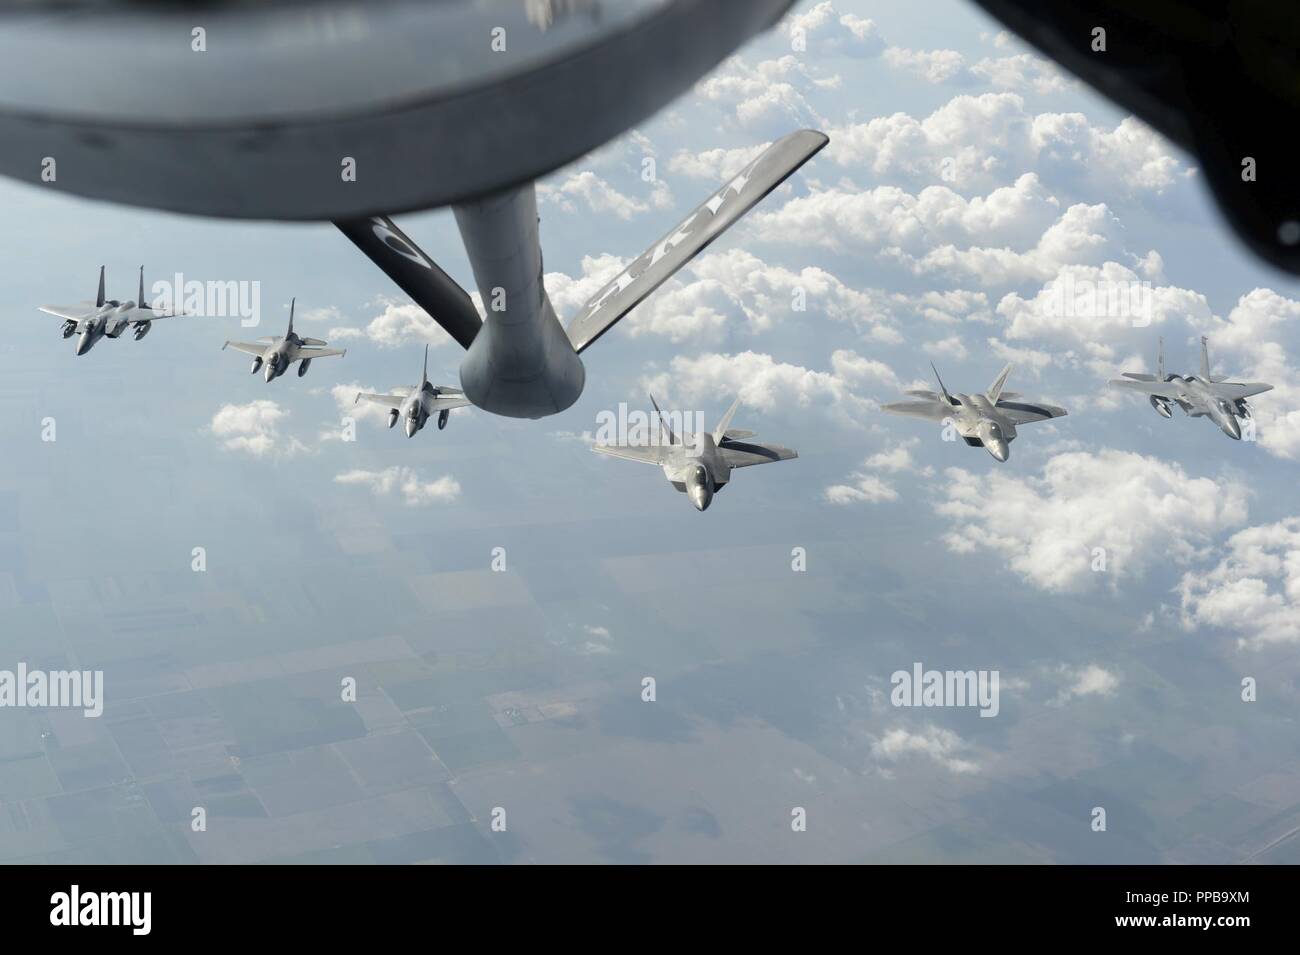 U.S. Air Force F-15C Eagles, F-22 Raptors and Romanian F-16 Fighting Falcons fly in formation above Bucharest, Romania, Aug. 20, 2018. The F-22s deployed from Germany to operating locations within other NATO member nations in order to maximize training opportunities while strengthening the NATO alliance and deterring regional aggression. Stock Photo